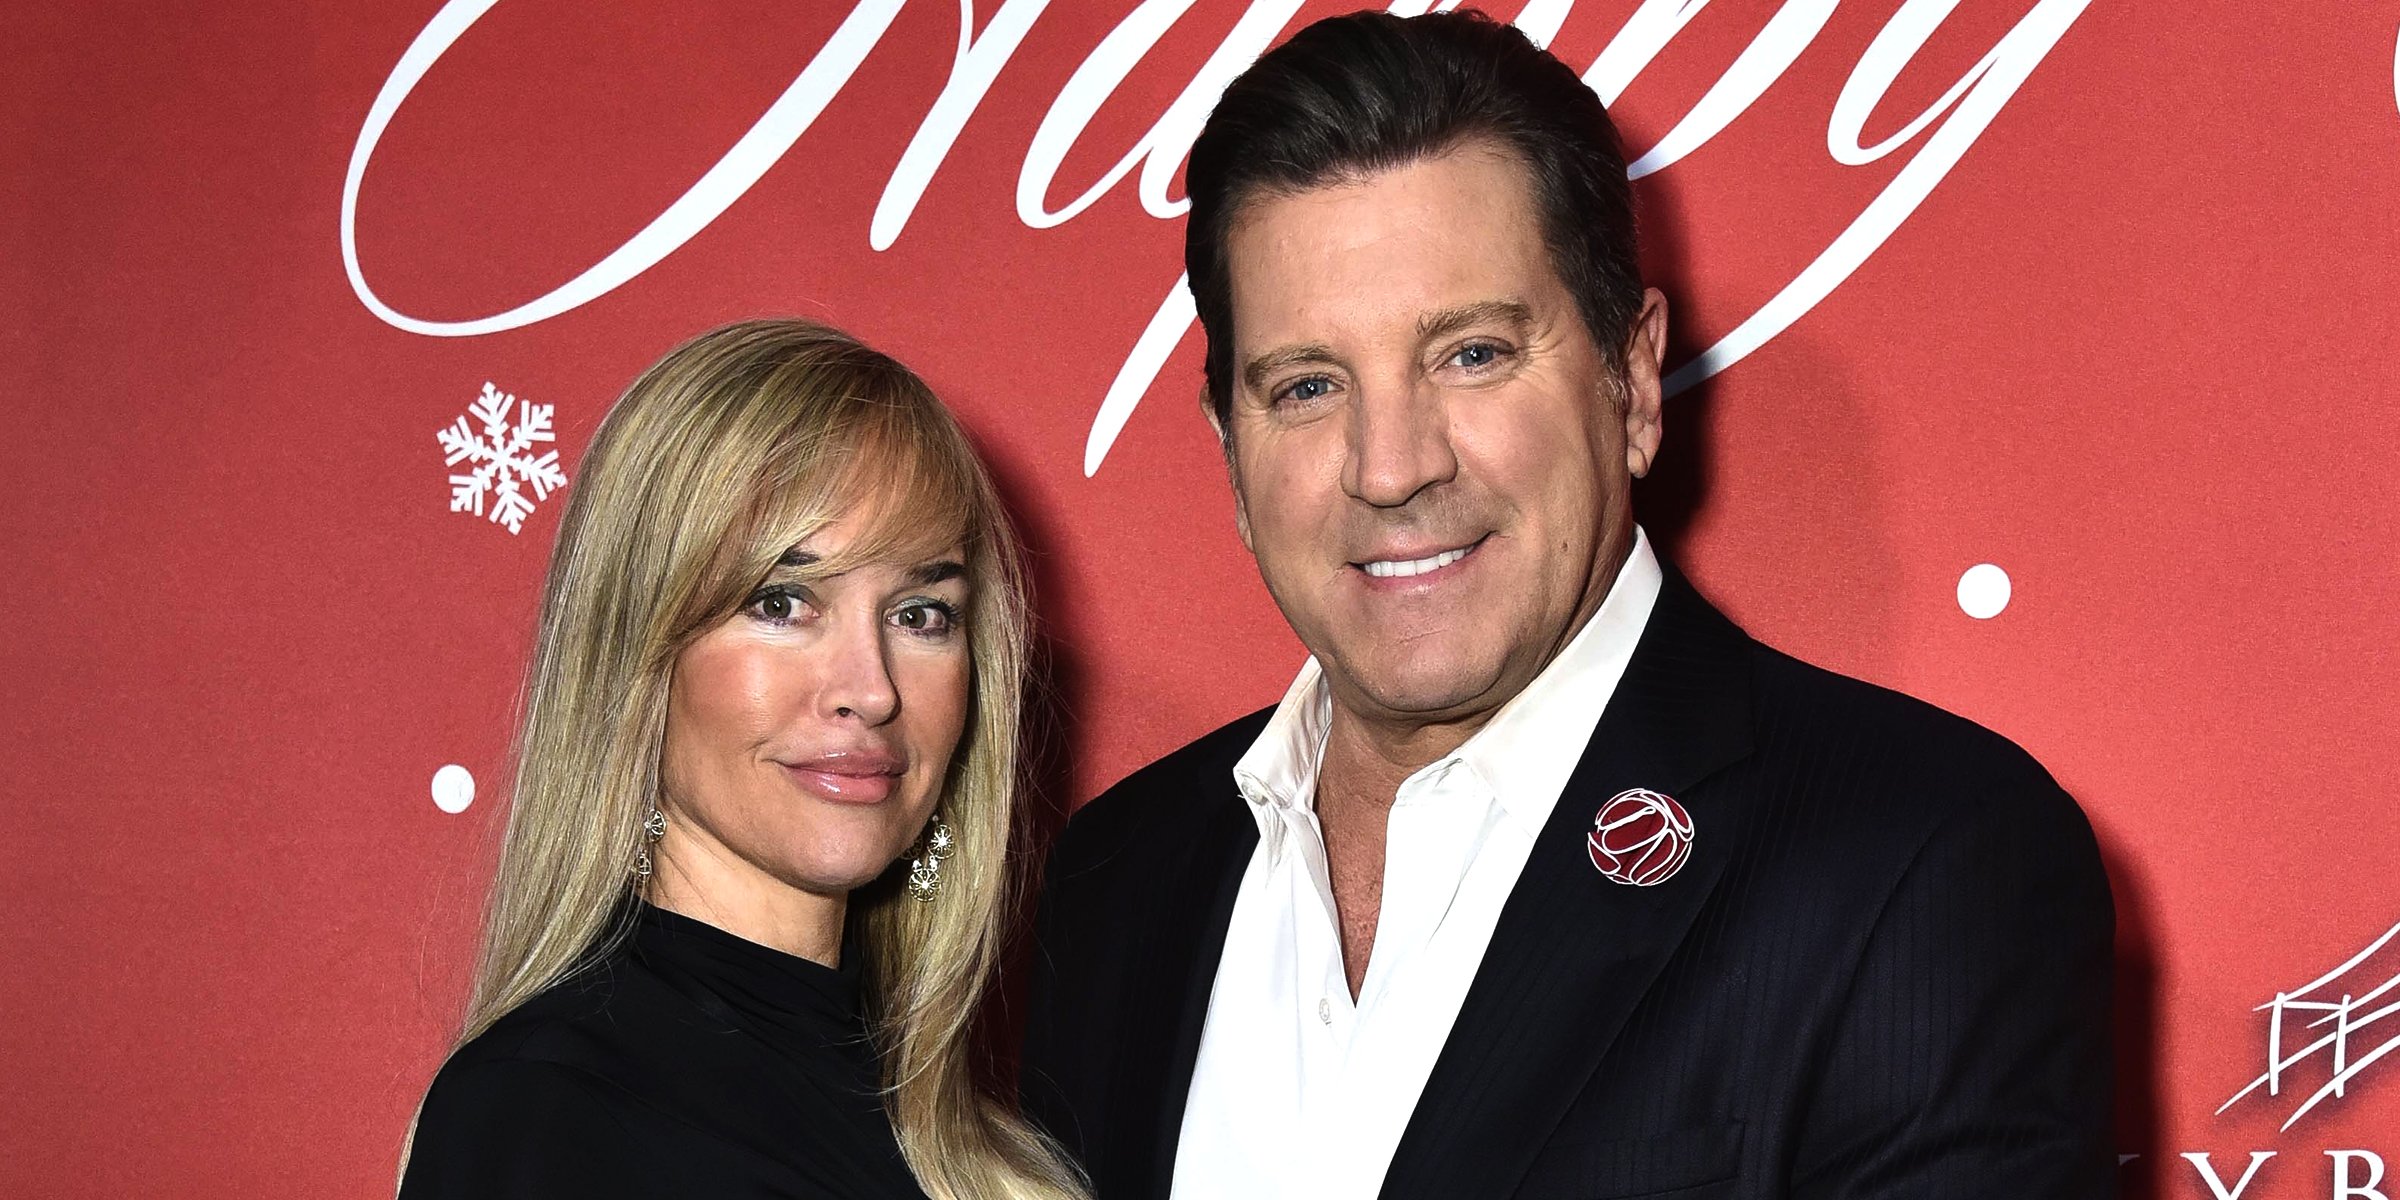 Eric Bolling Has Been Married to Wife Adrienne Bolling for 25 Years